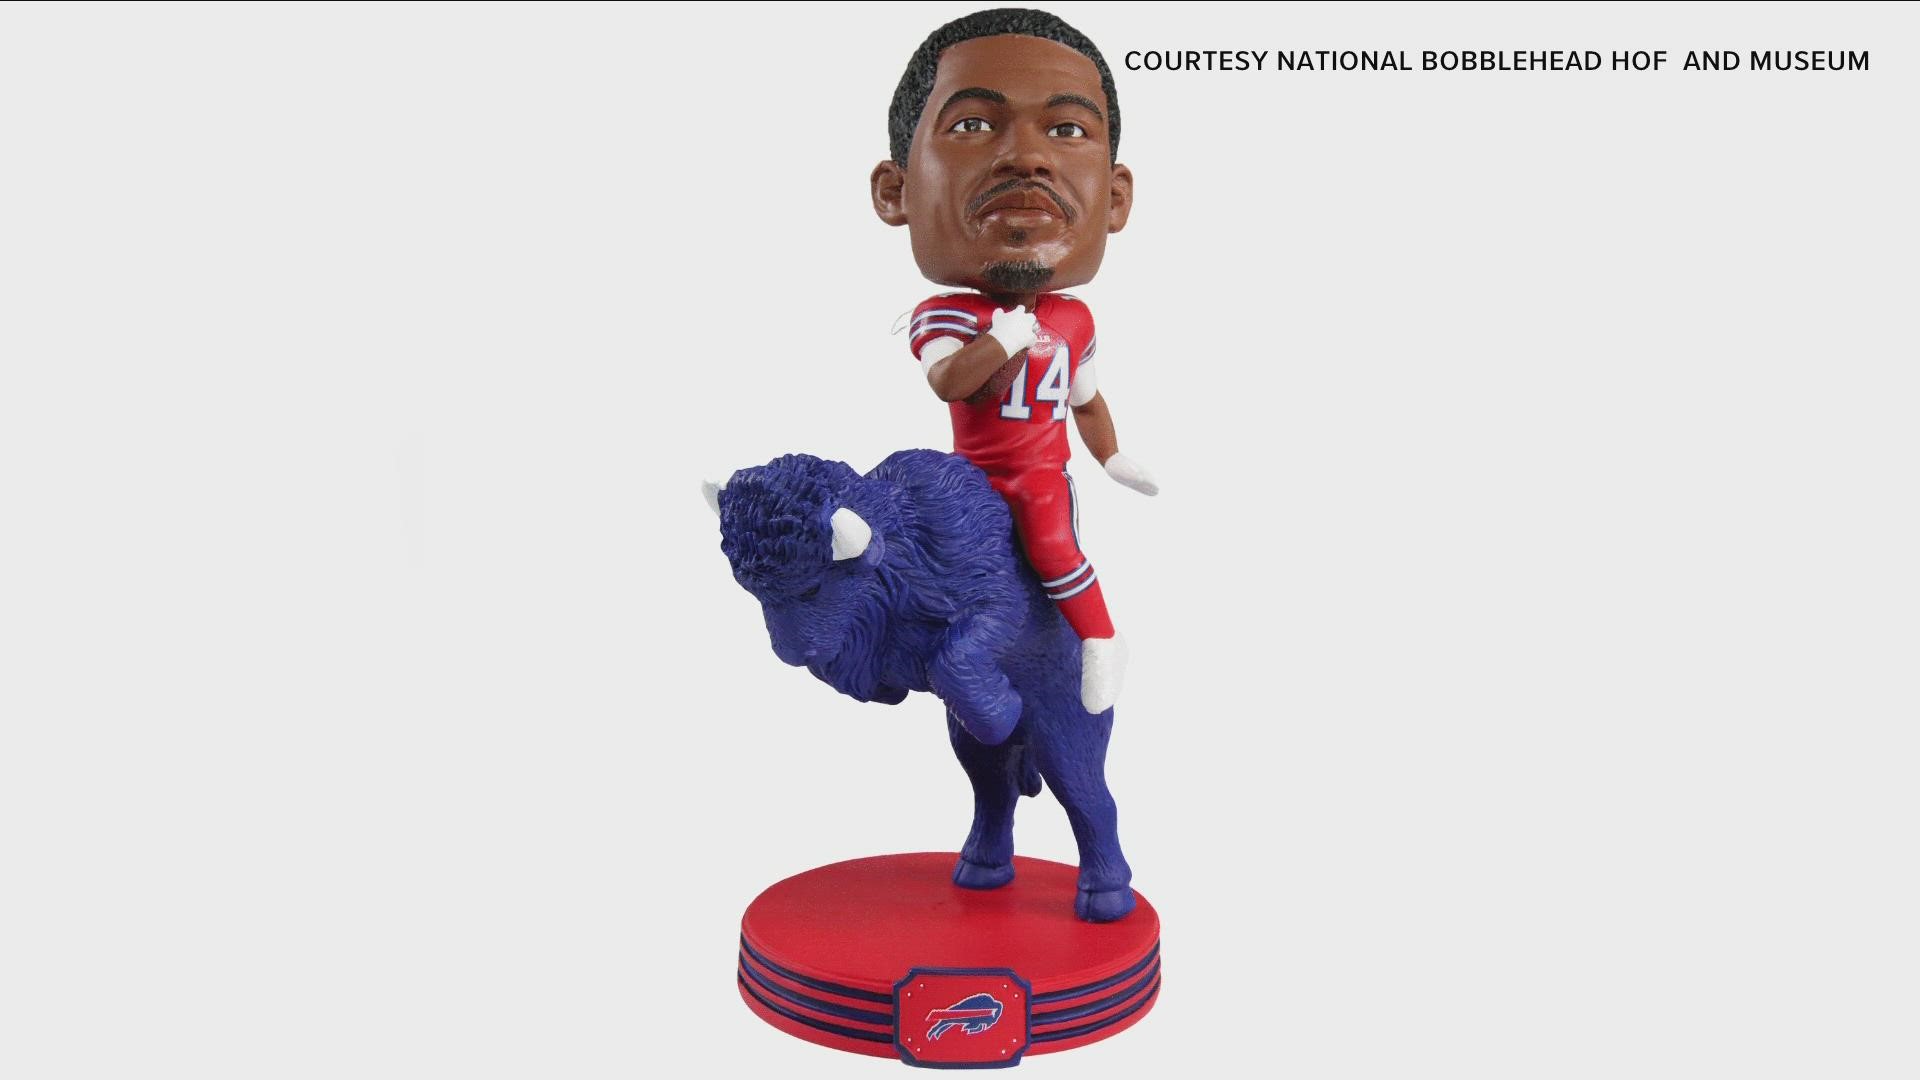 In honor of the wide receiver's birthday, the National Bobblehead Hall of Fame and Museum is releasing a limited-edition bobblehead featuring Diggs riding a buffalo.